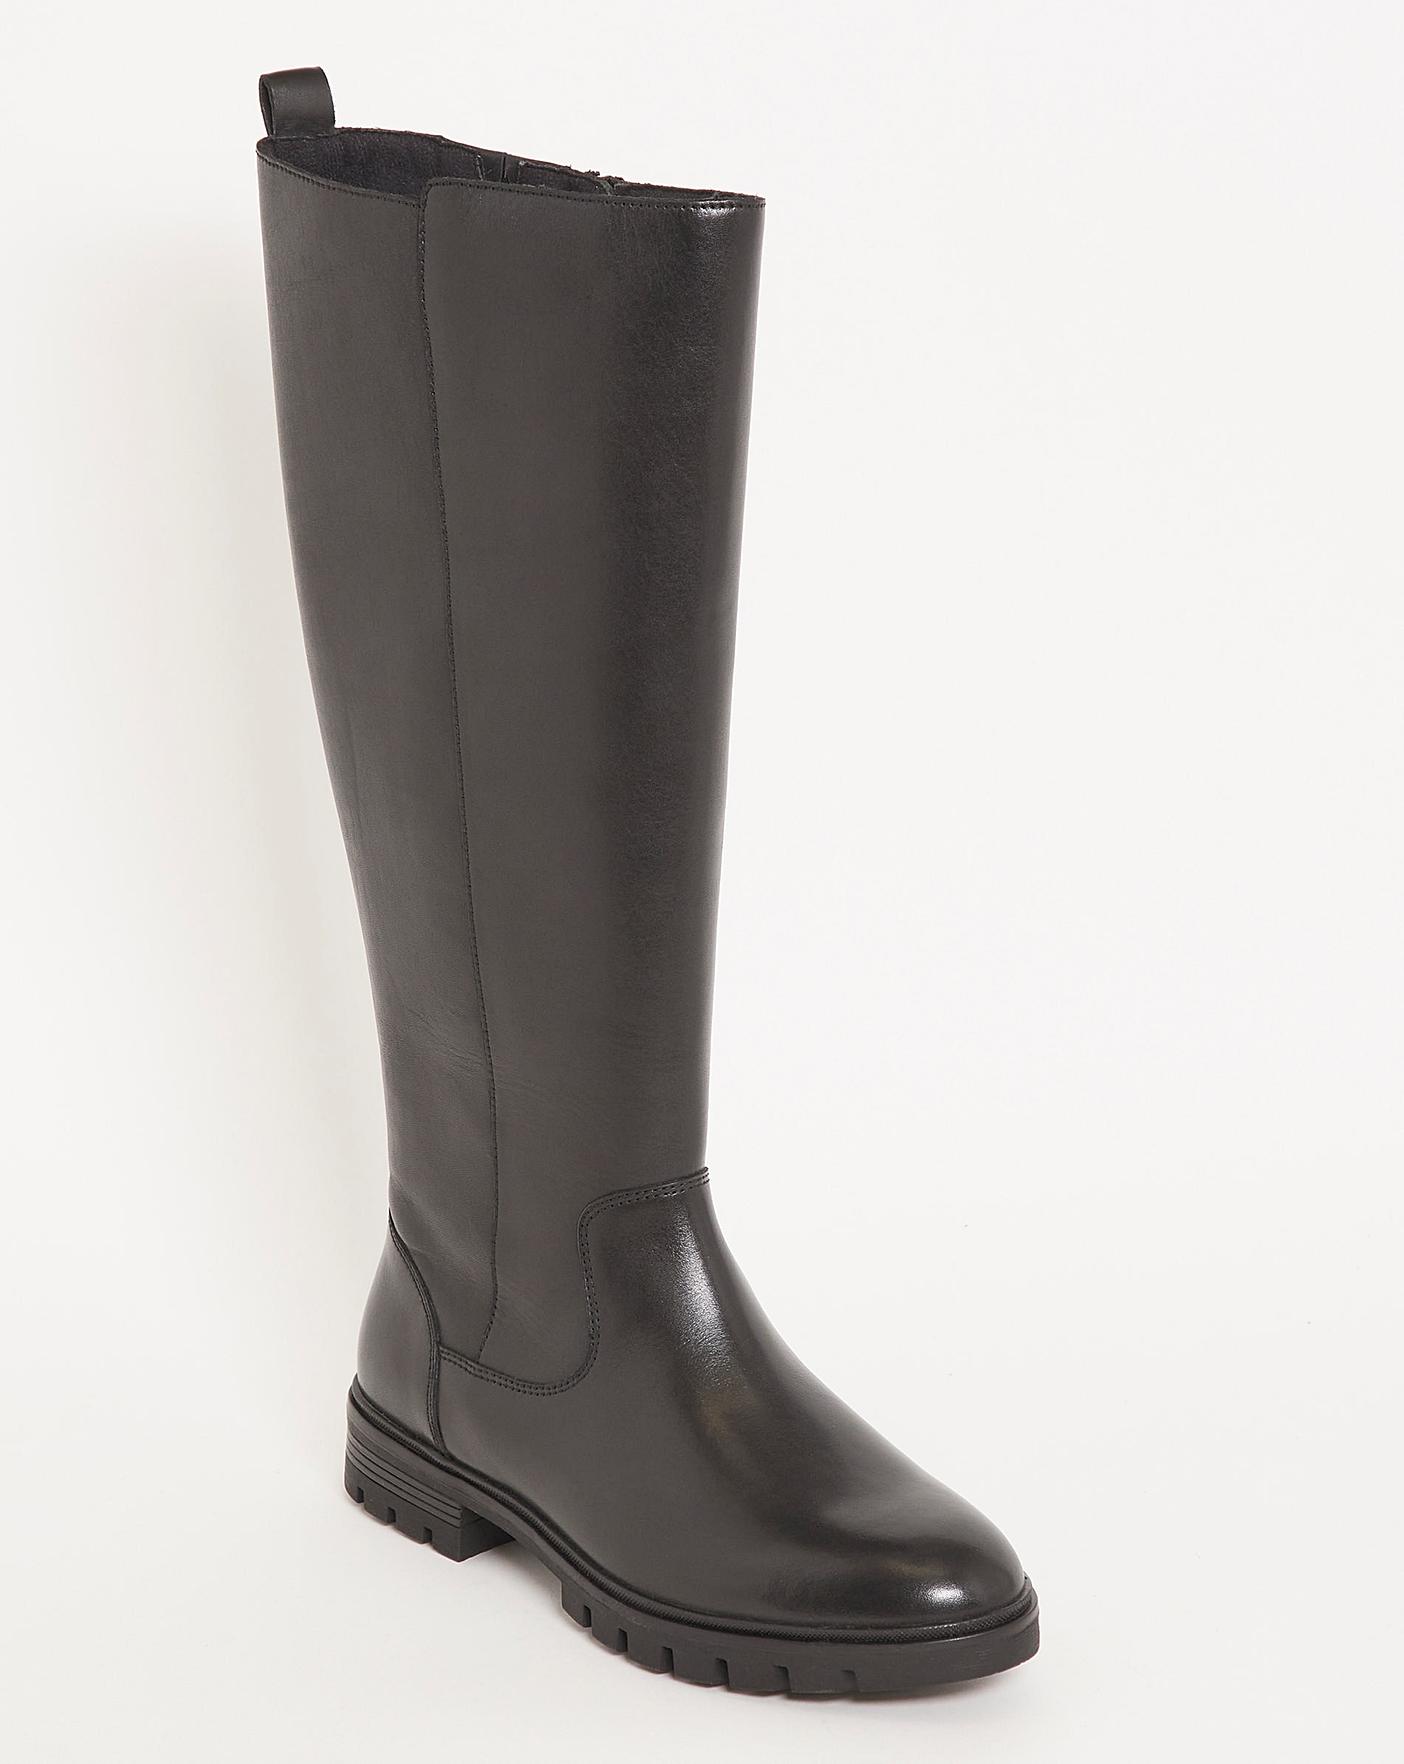 Water Resistant Leather Hi Boot E Fit | J D Williams